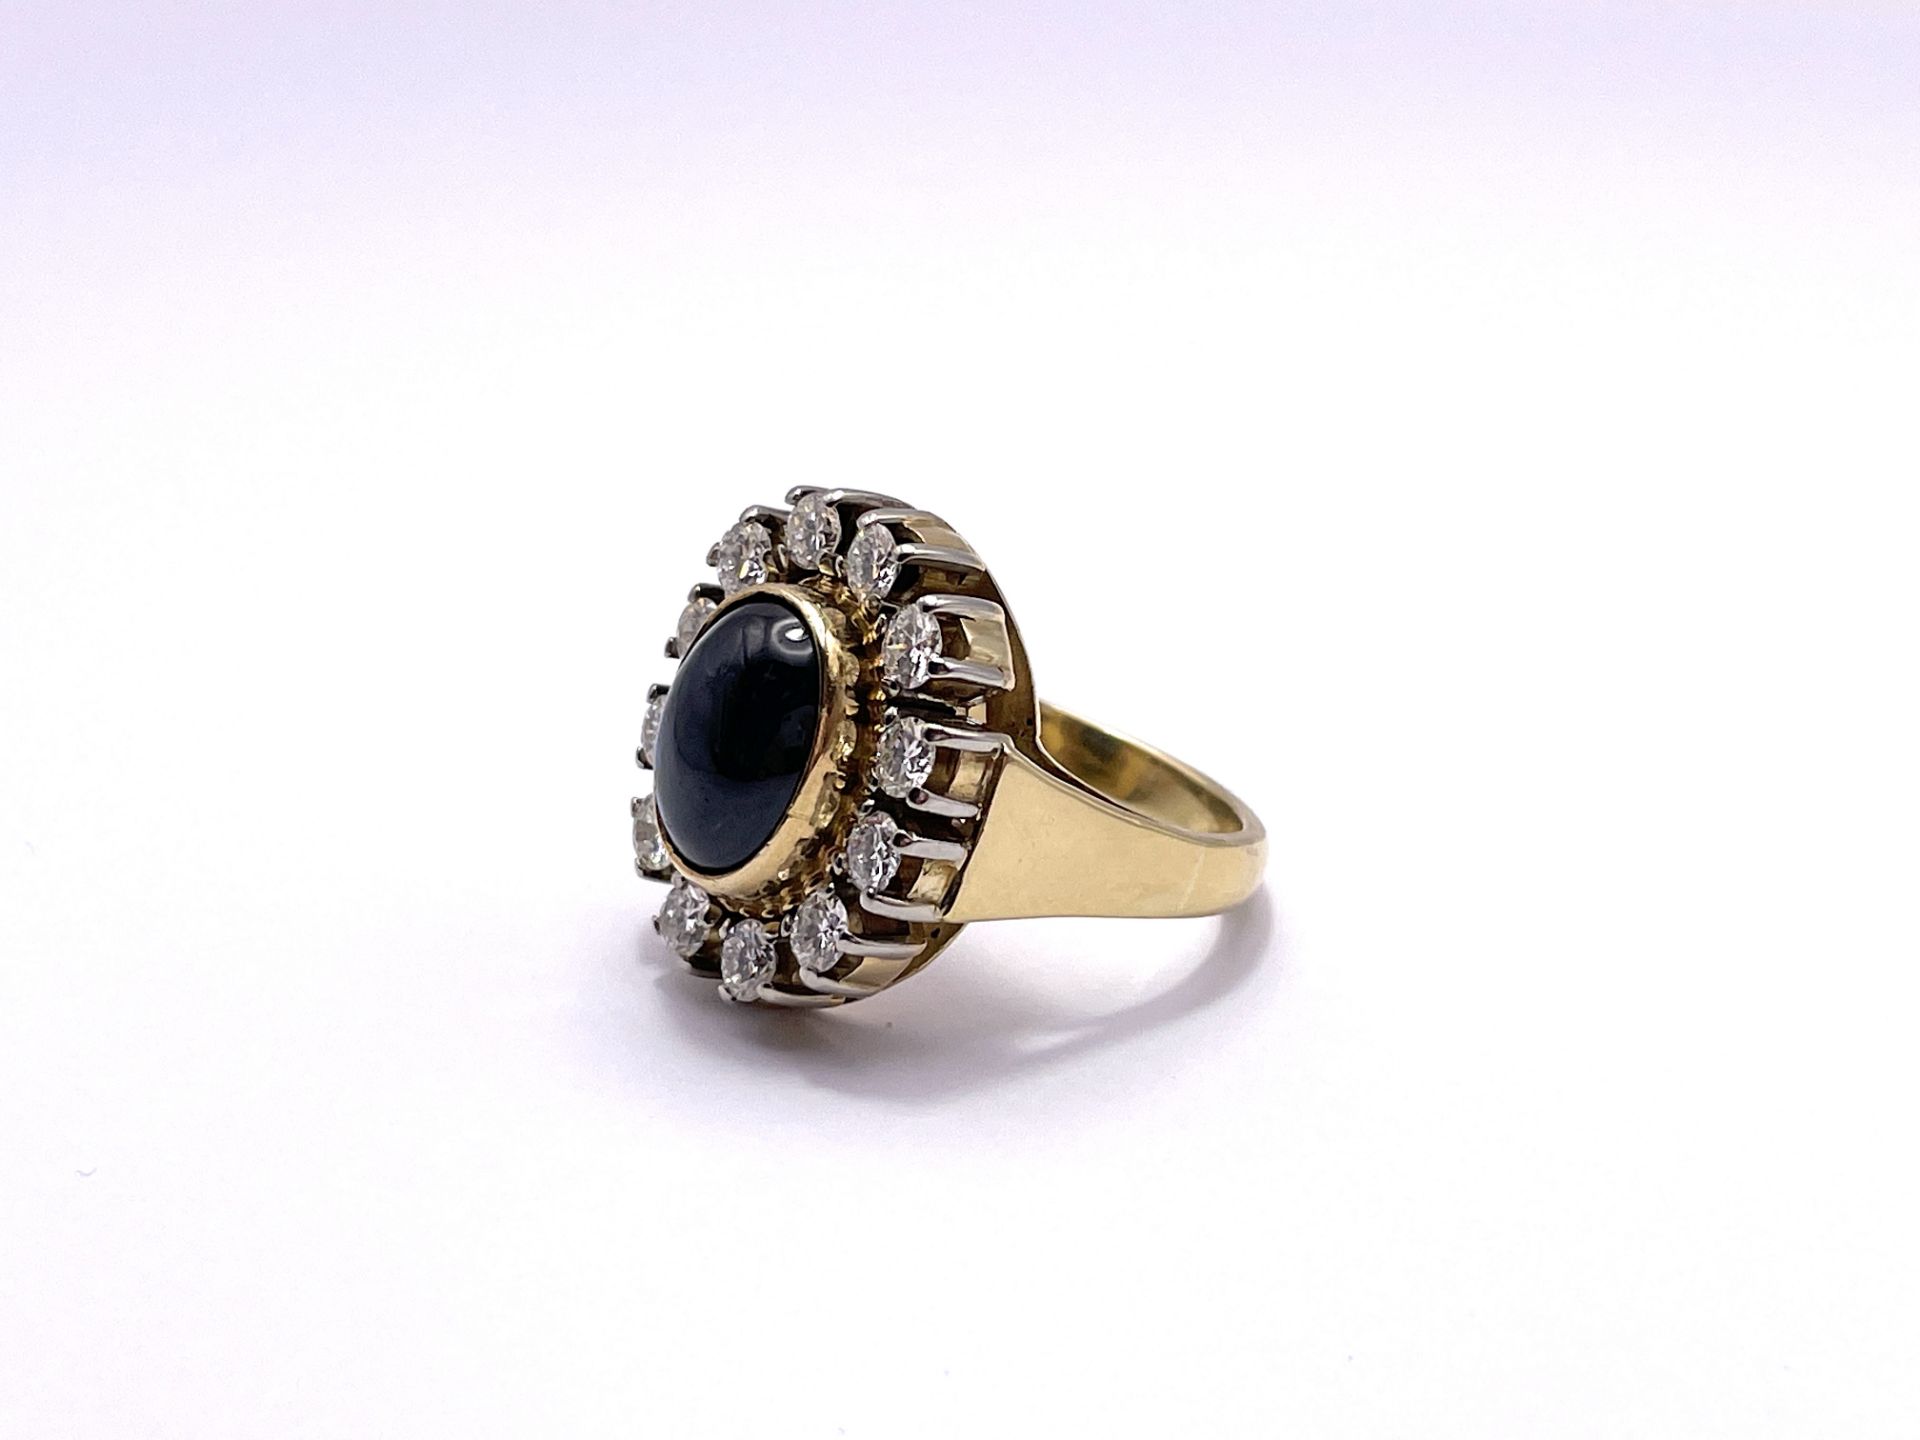 Sapphire ring with brilliants - Image 5 of 6